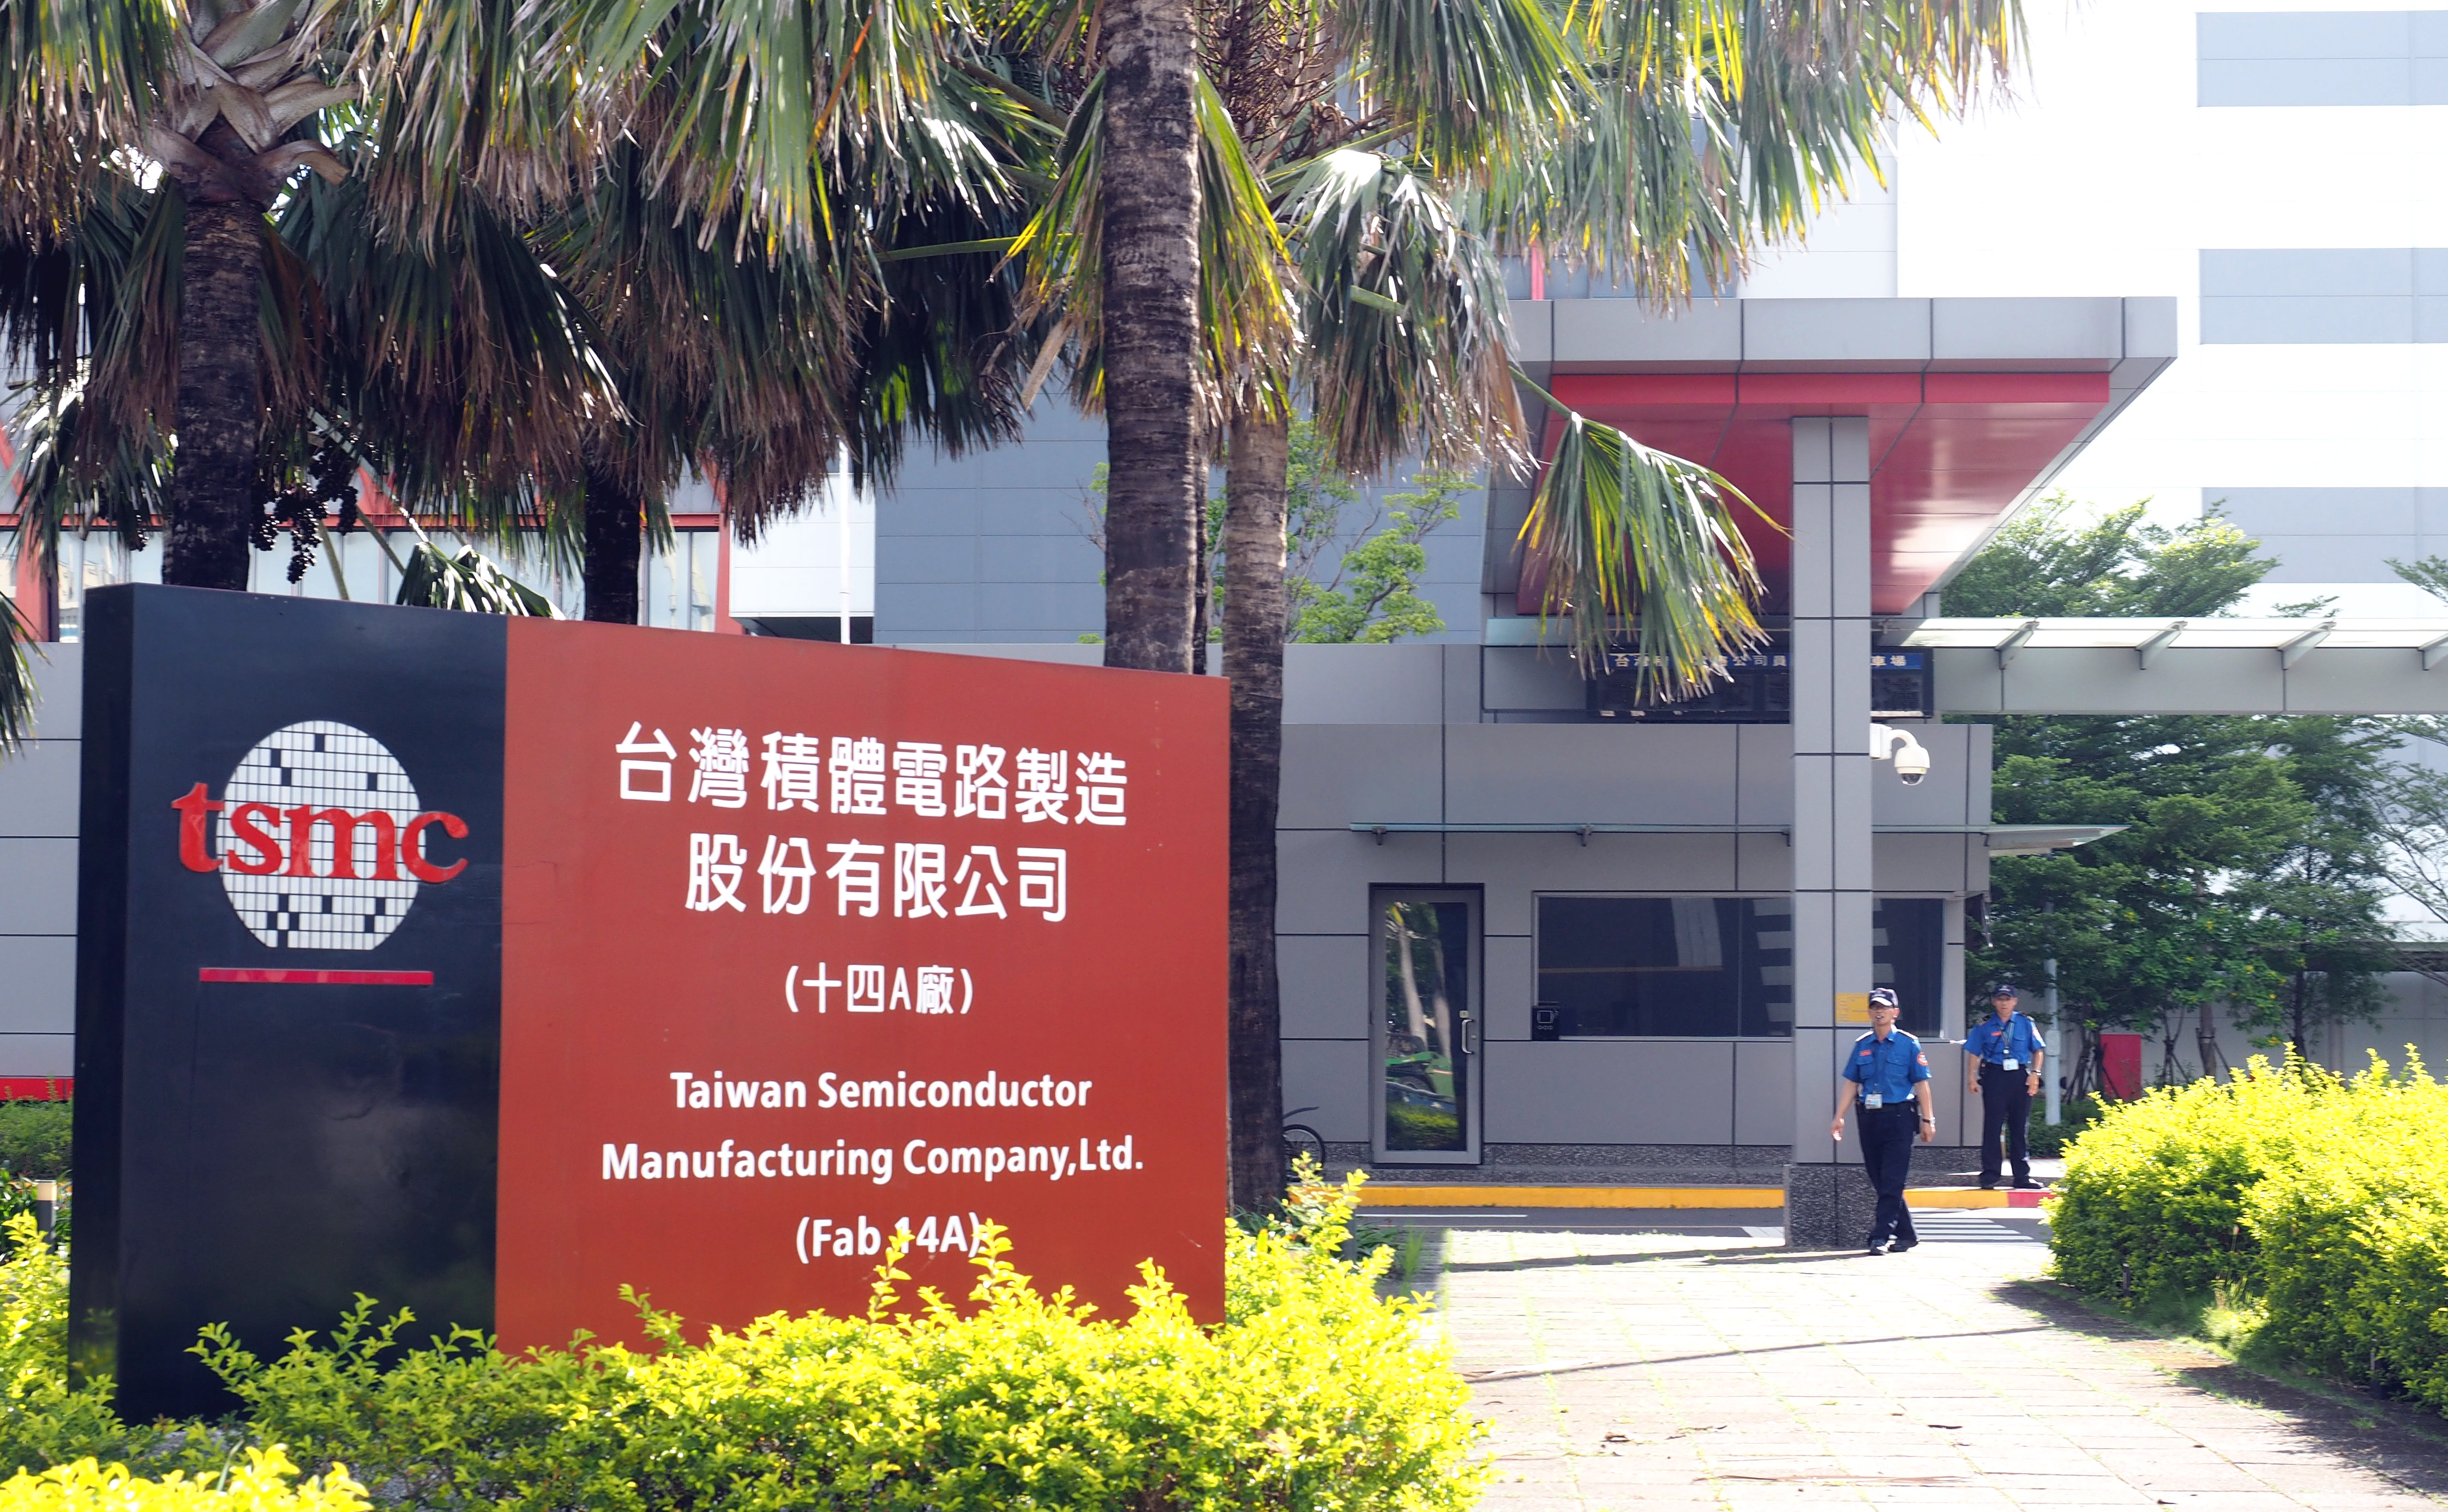 IPHONE BOOST? The facade of Taiwan Semiconductor Manufacturing Company (TSMC), the world's largest contract chipmaker, in Tainan, Taiwan on May 26, 2016. File photo by David Chang/EPA 